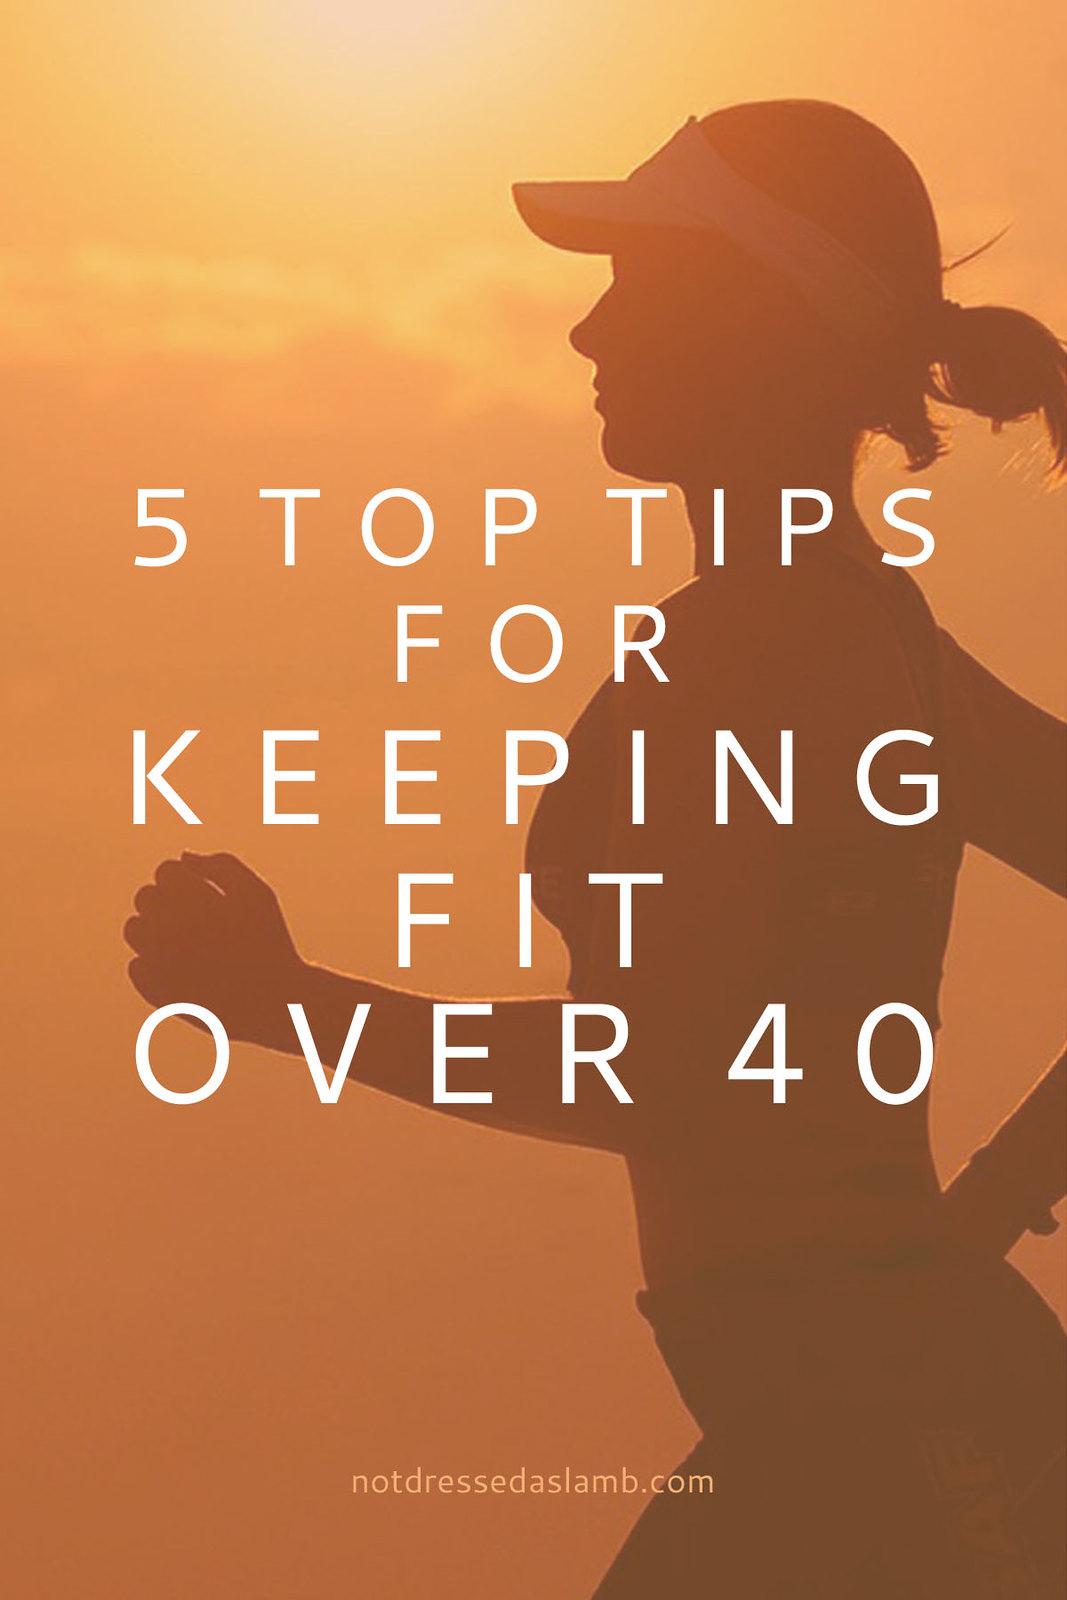 5 Top Tips For Keeping Fit Over 40 | Not Dressed As Lamb